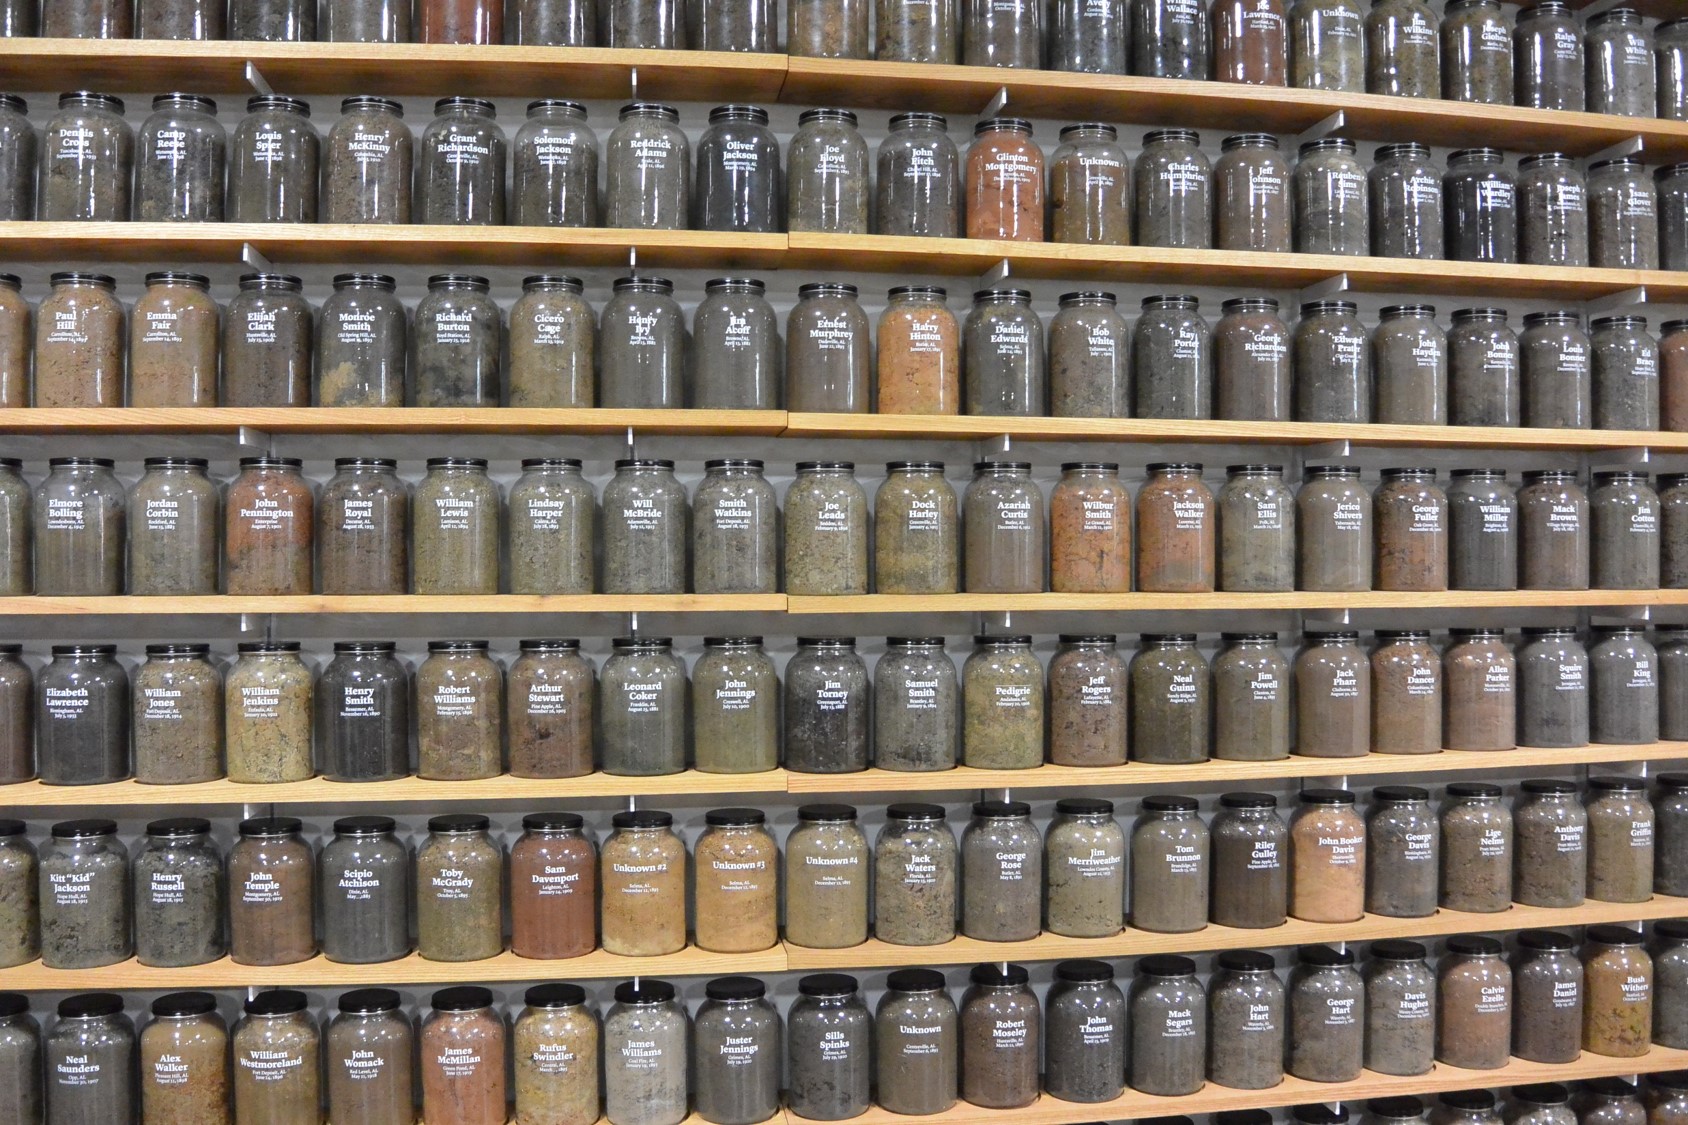 a display of soil samples in mason jars from lynching sites across America